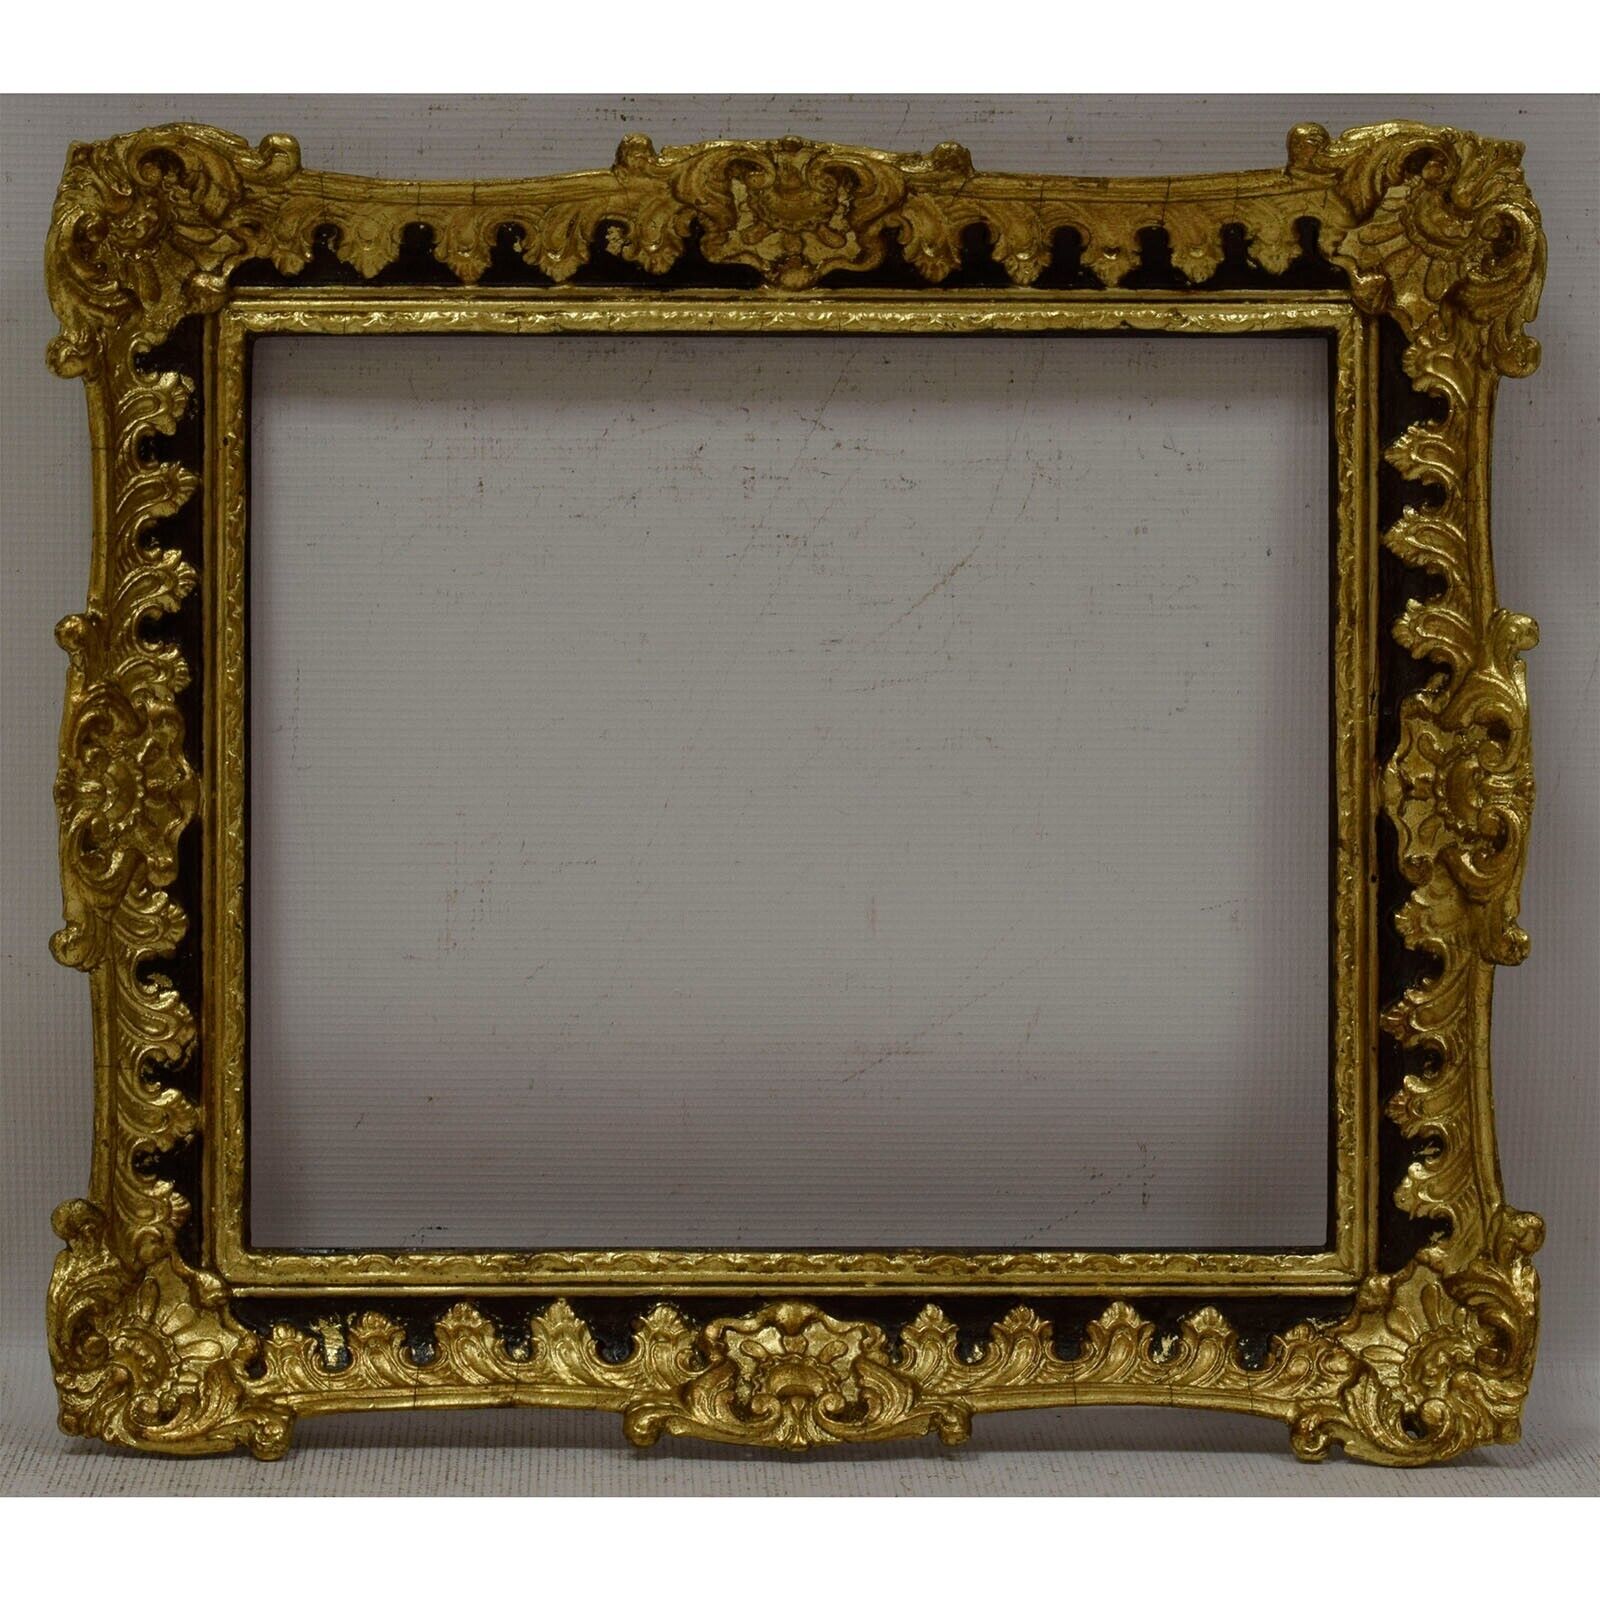 Ca 1850-1900 Old wooden frame Original condition Internal: 14.2 x 11.8 in